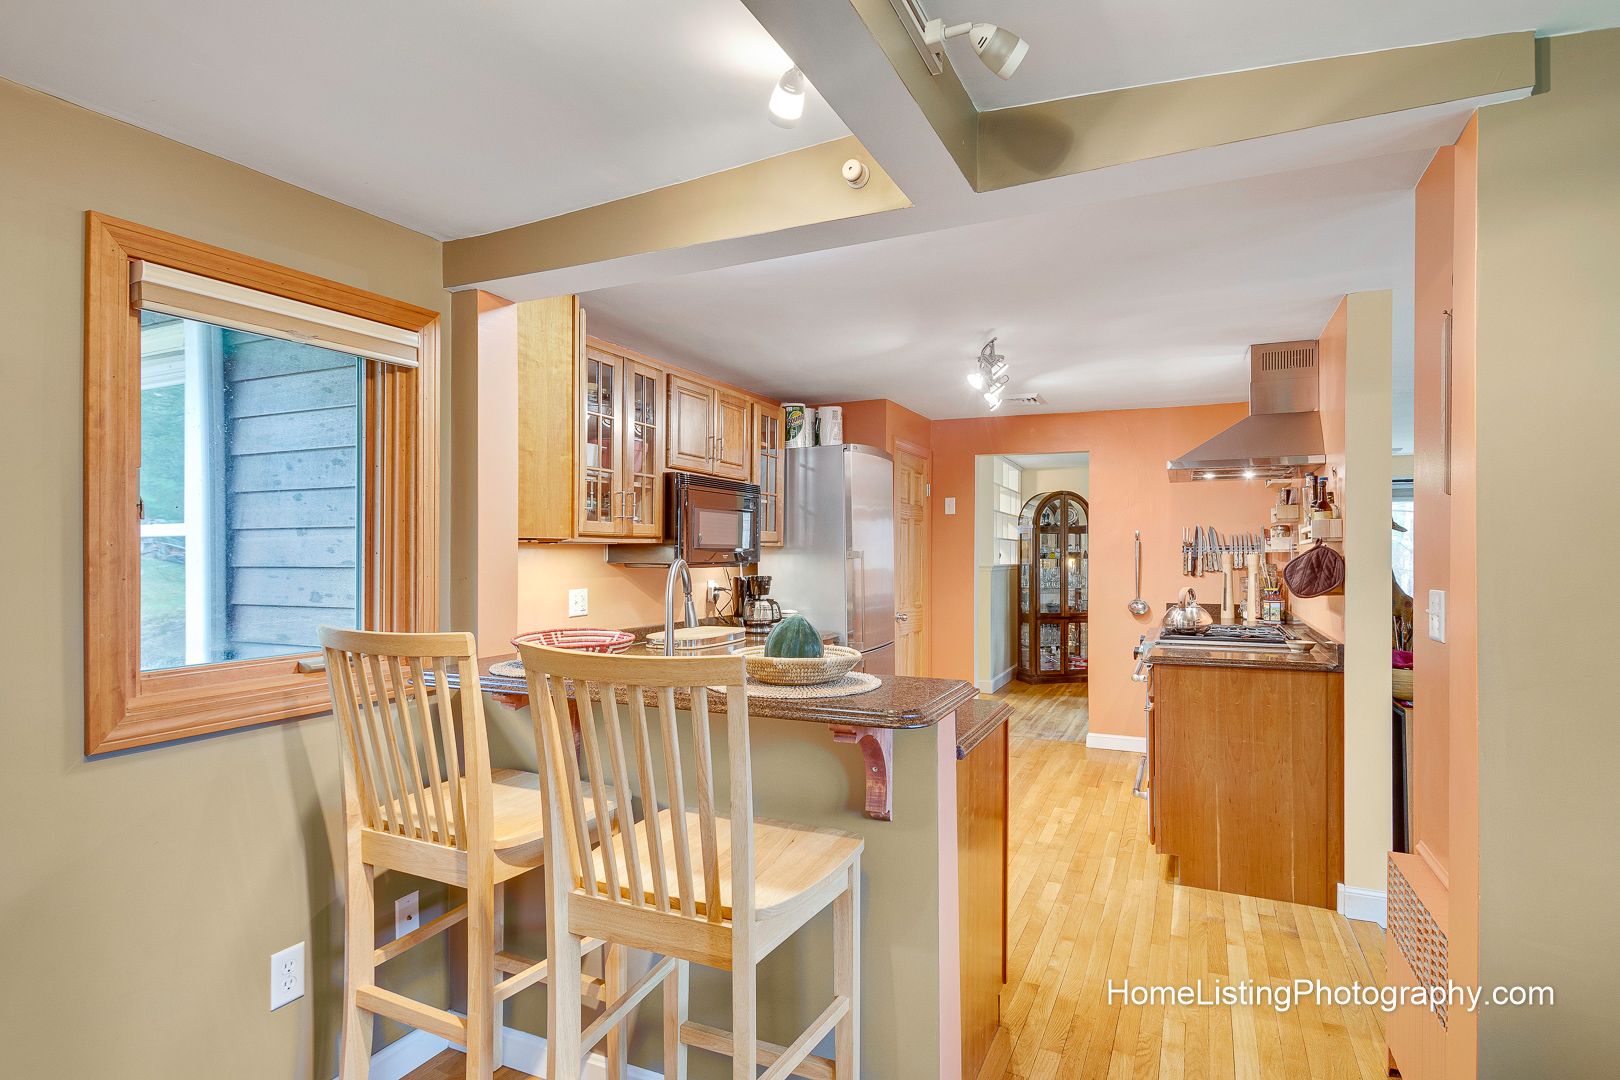 Thomas Adach - Bedford MA professional real estate photographer - 508-655-2225 Home Listing Photography